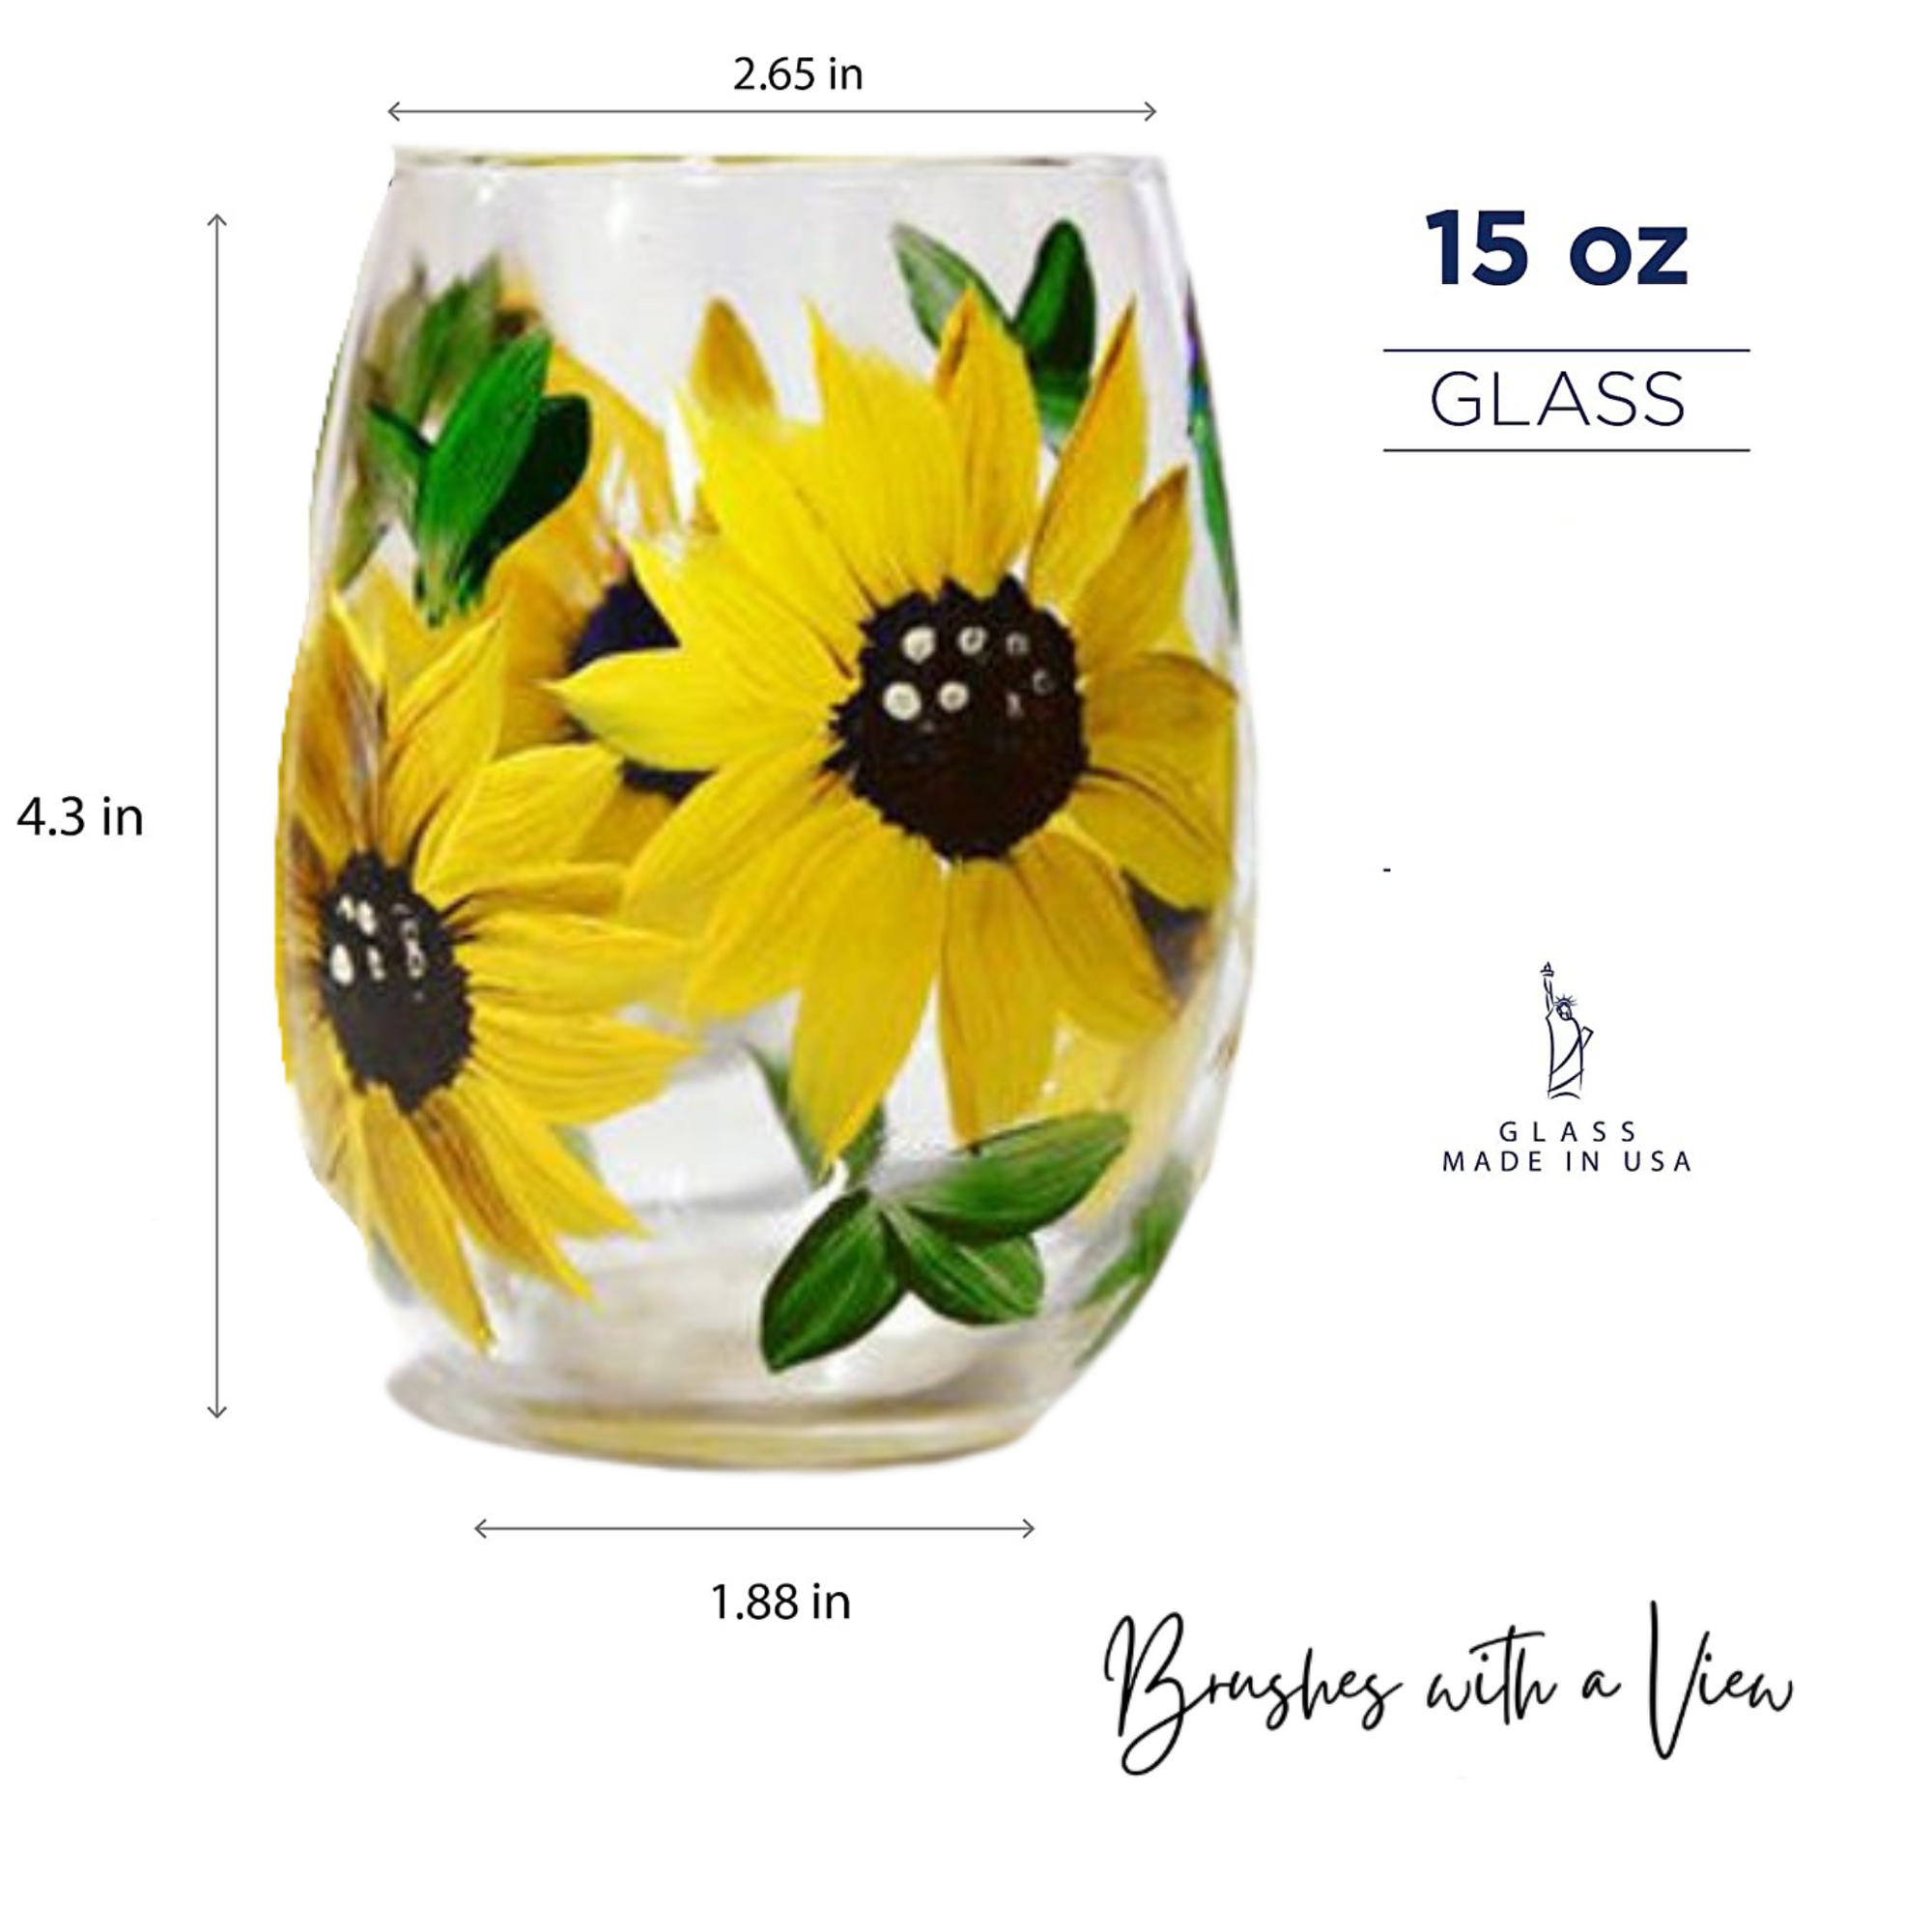 Sunflower Stemmed Wine Glasses - Gift for Women - Sunflower Kitchen Decor -  Rustic Country Farmhouse - Set of 2-12 ounce stemmed - Hand Painted